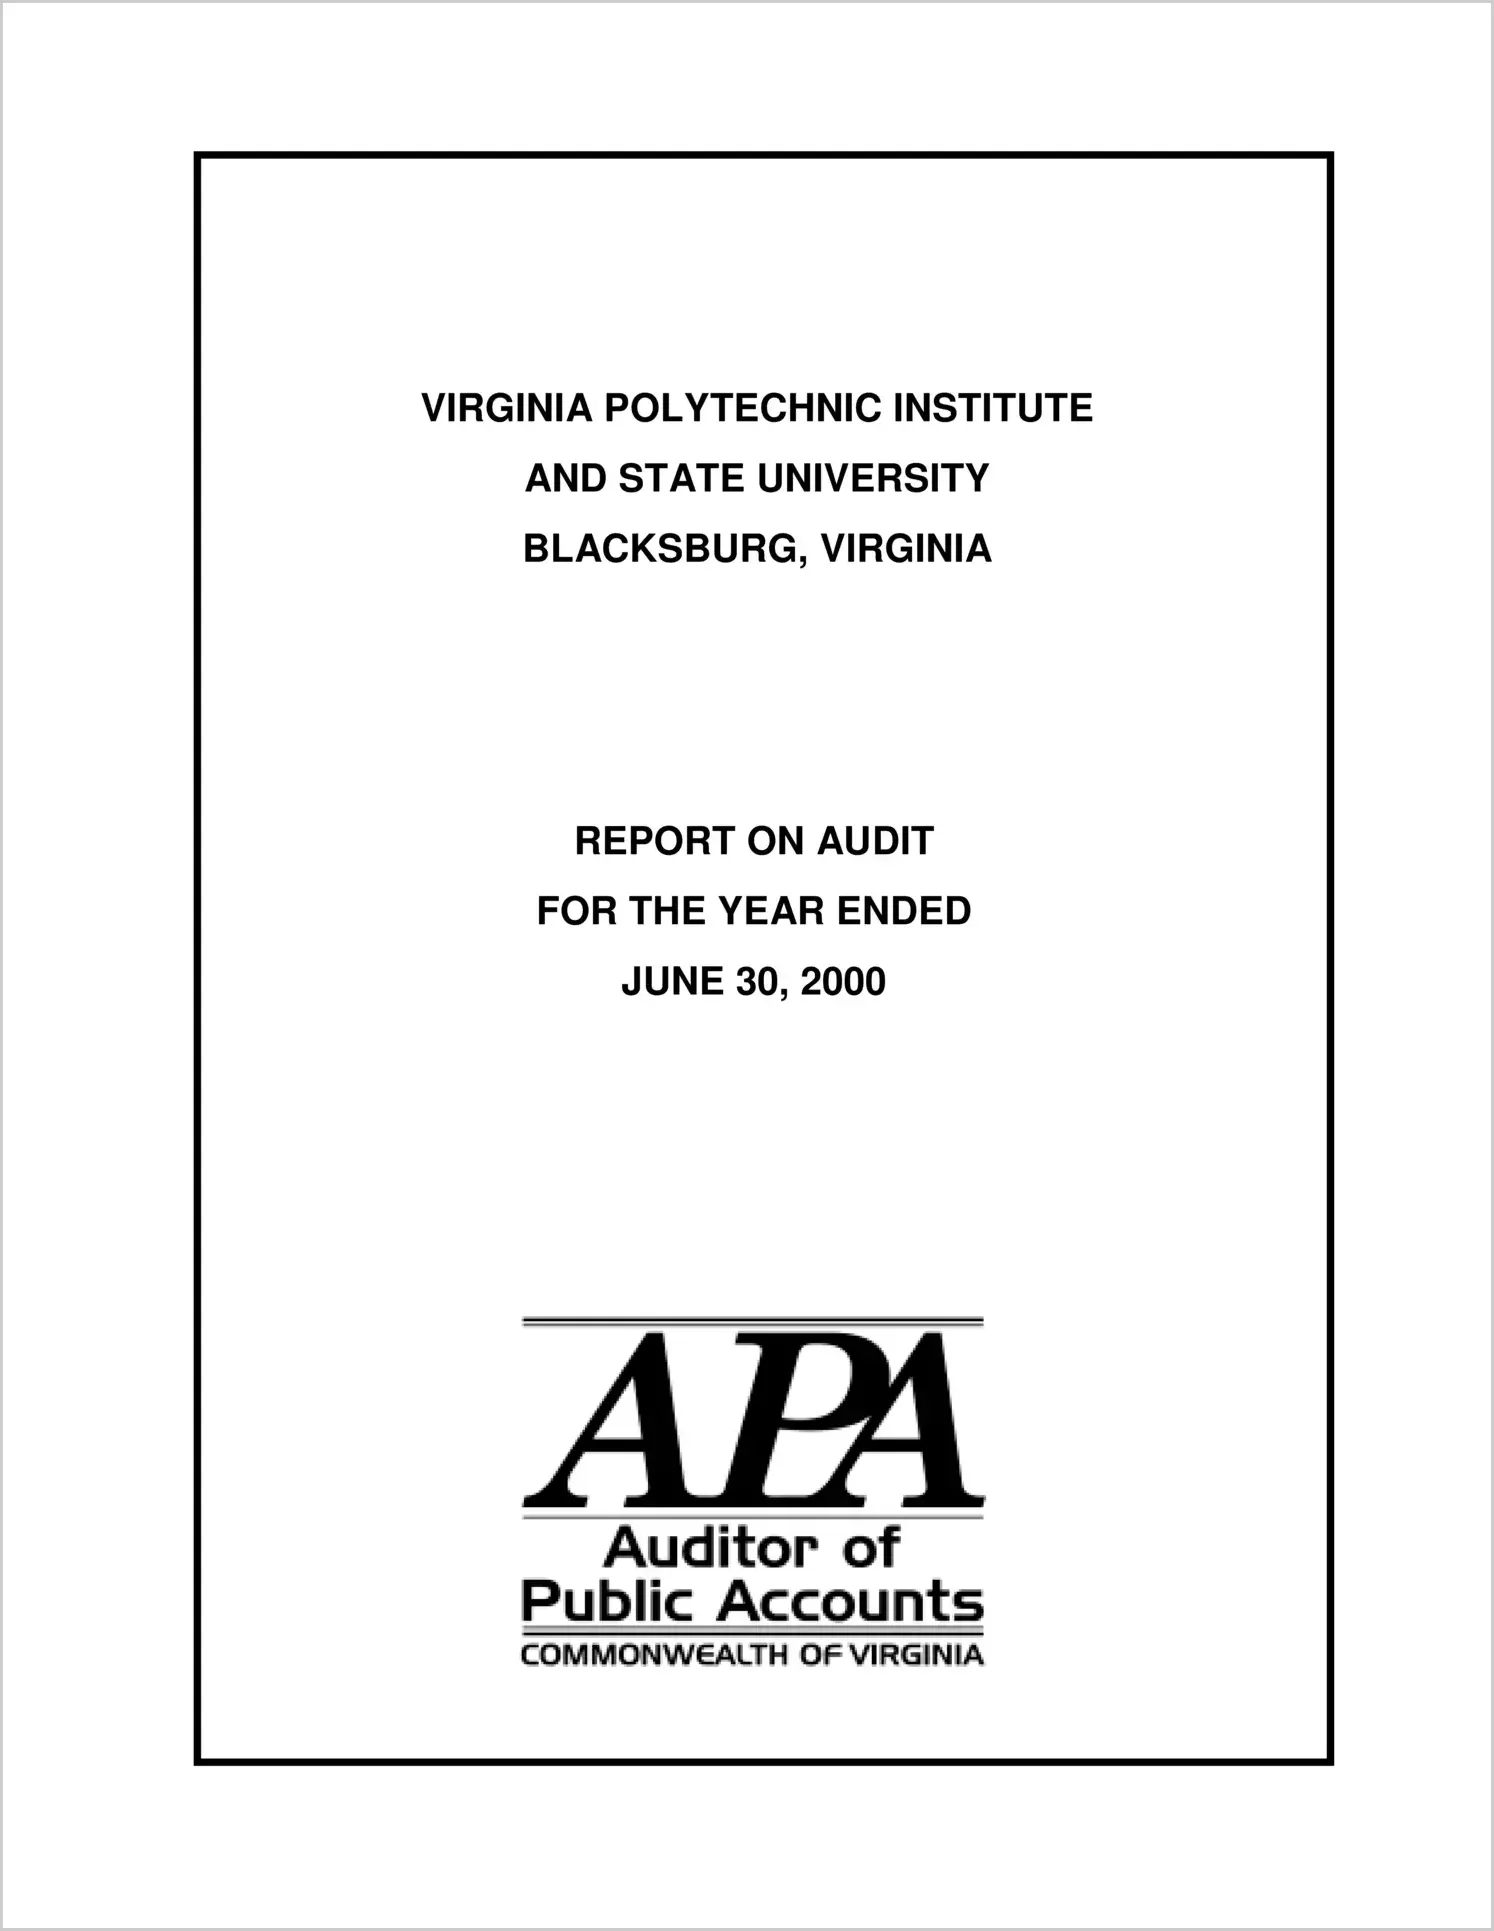 Virginia Polytechnic Institute and State University for the year ended June 30, 2000